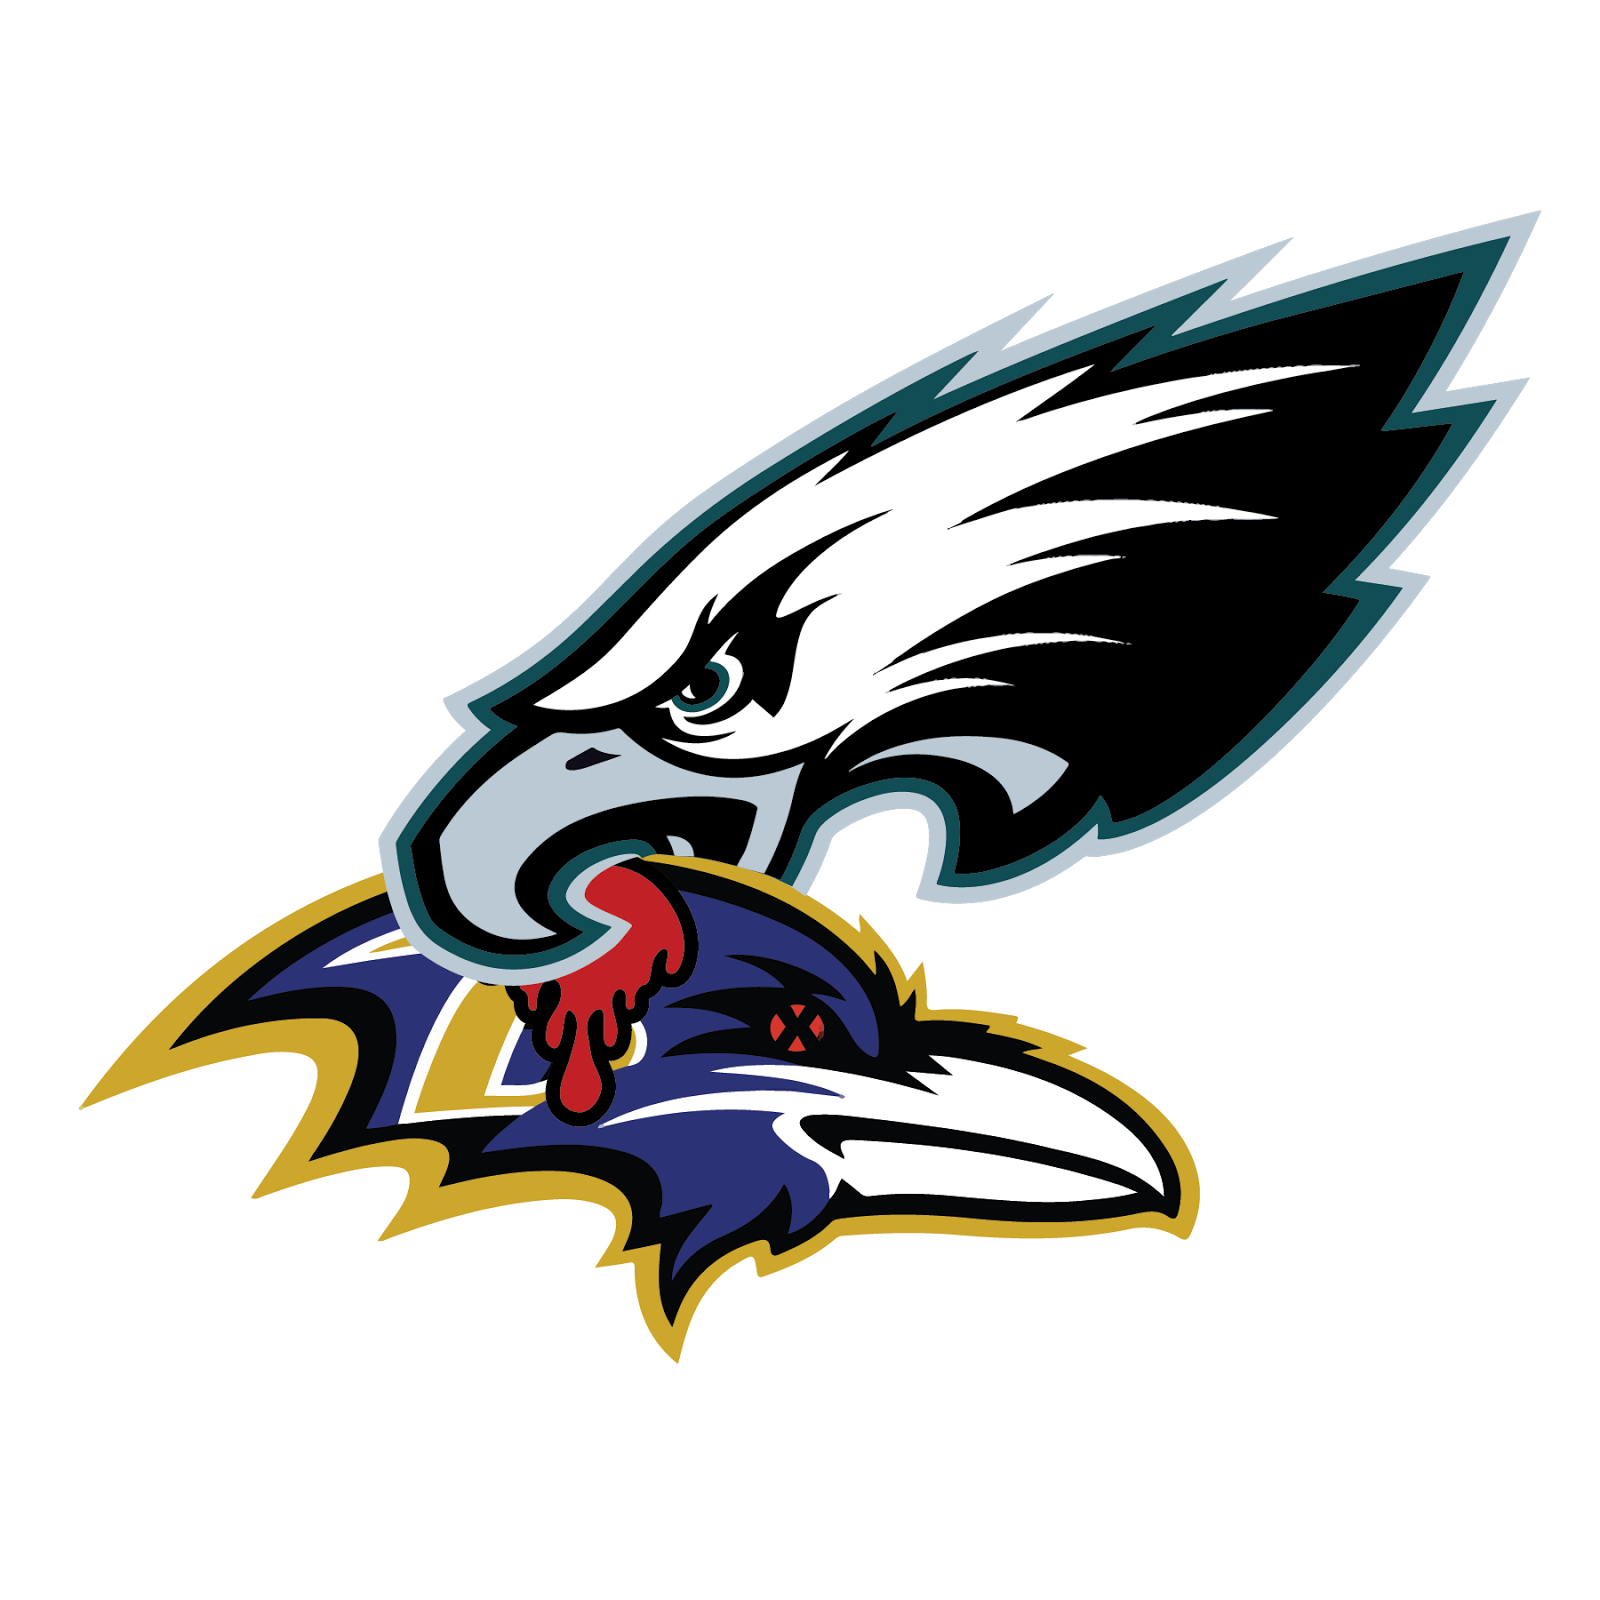 Logos heavy metal inspired. Eagles clipart nfl